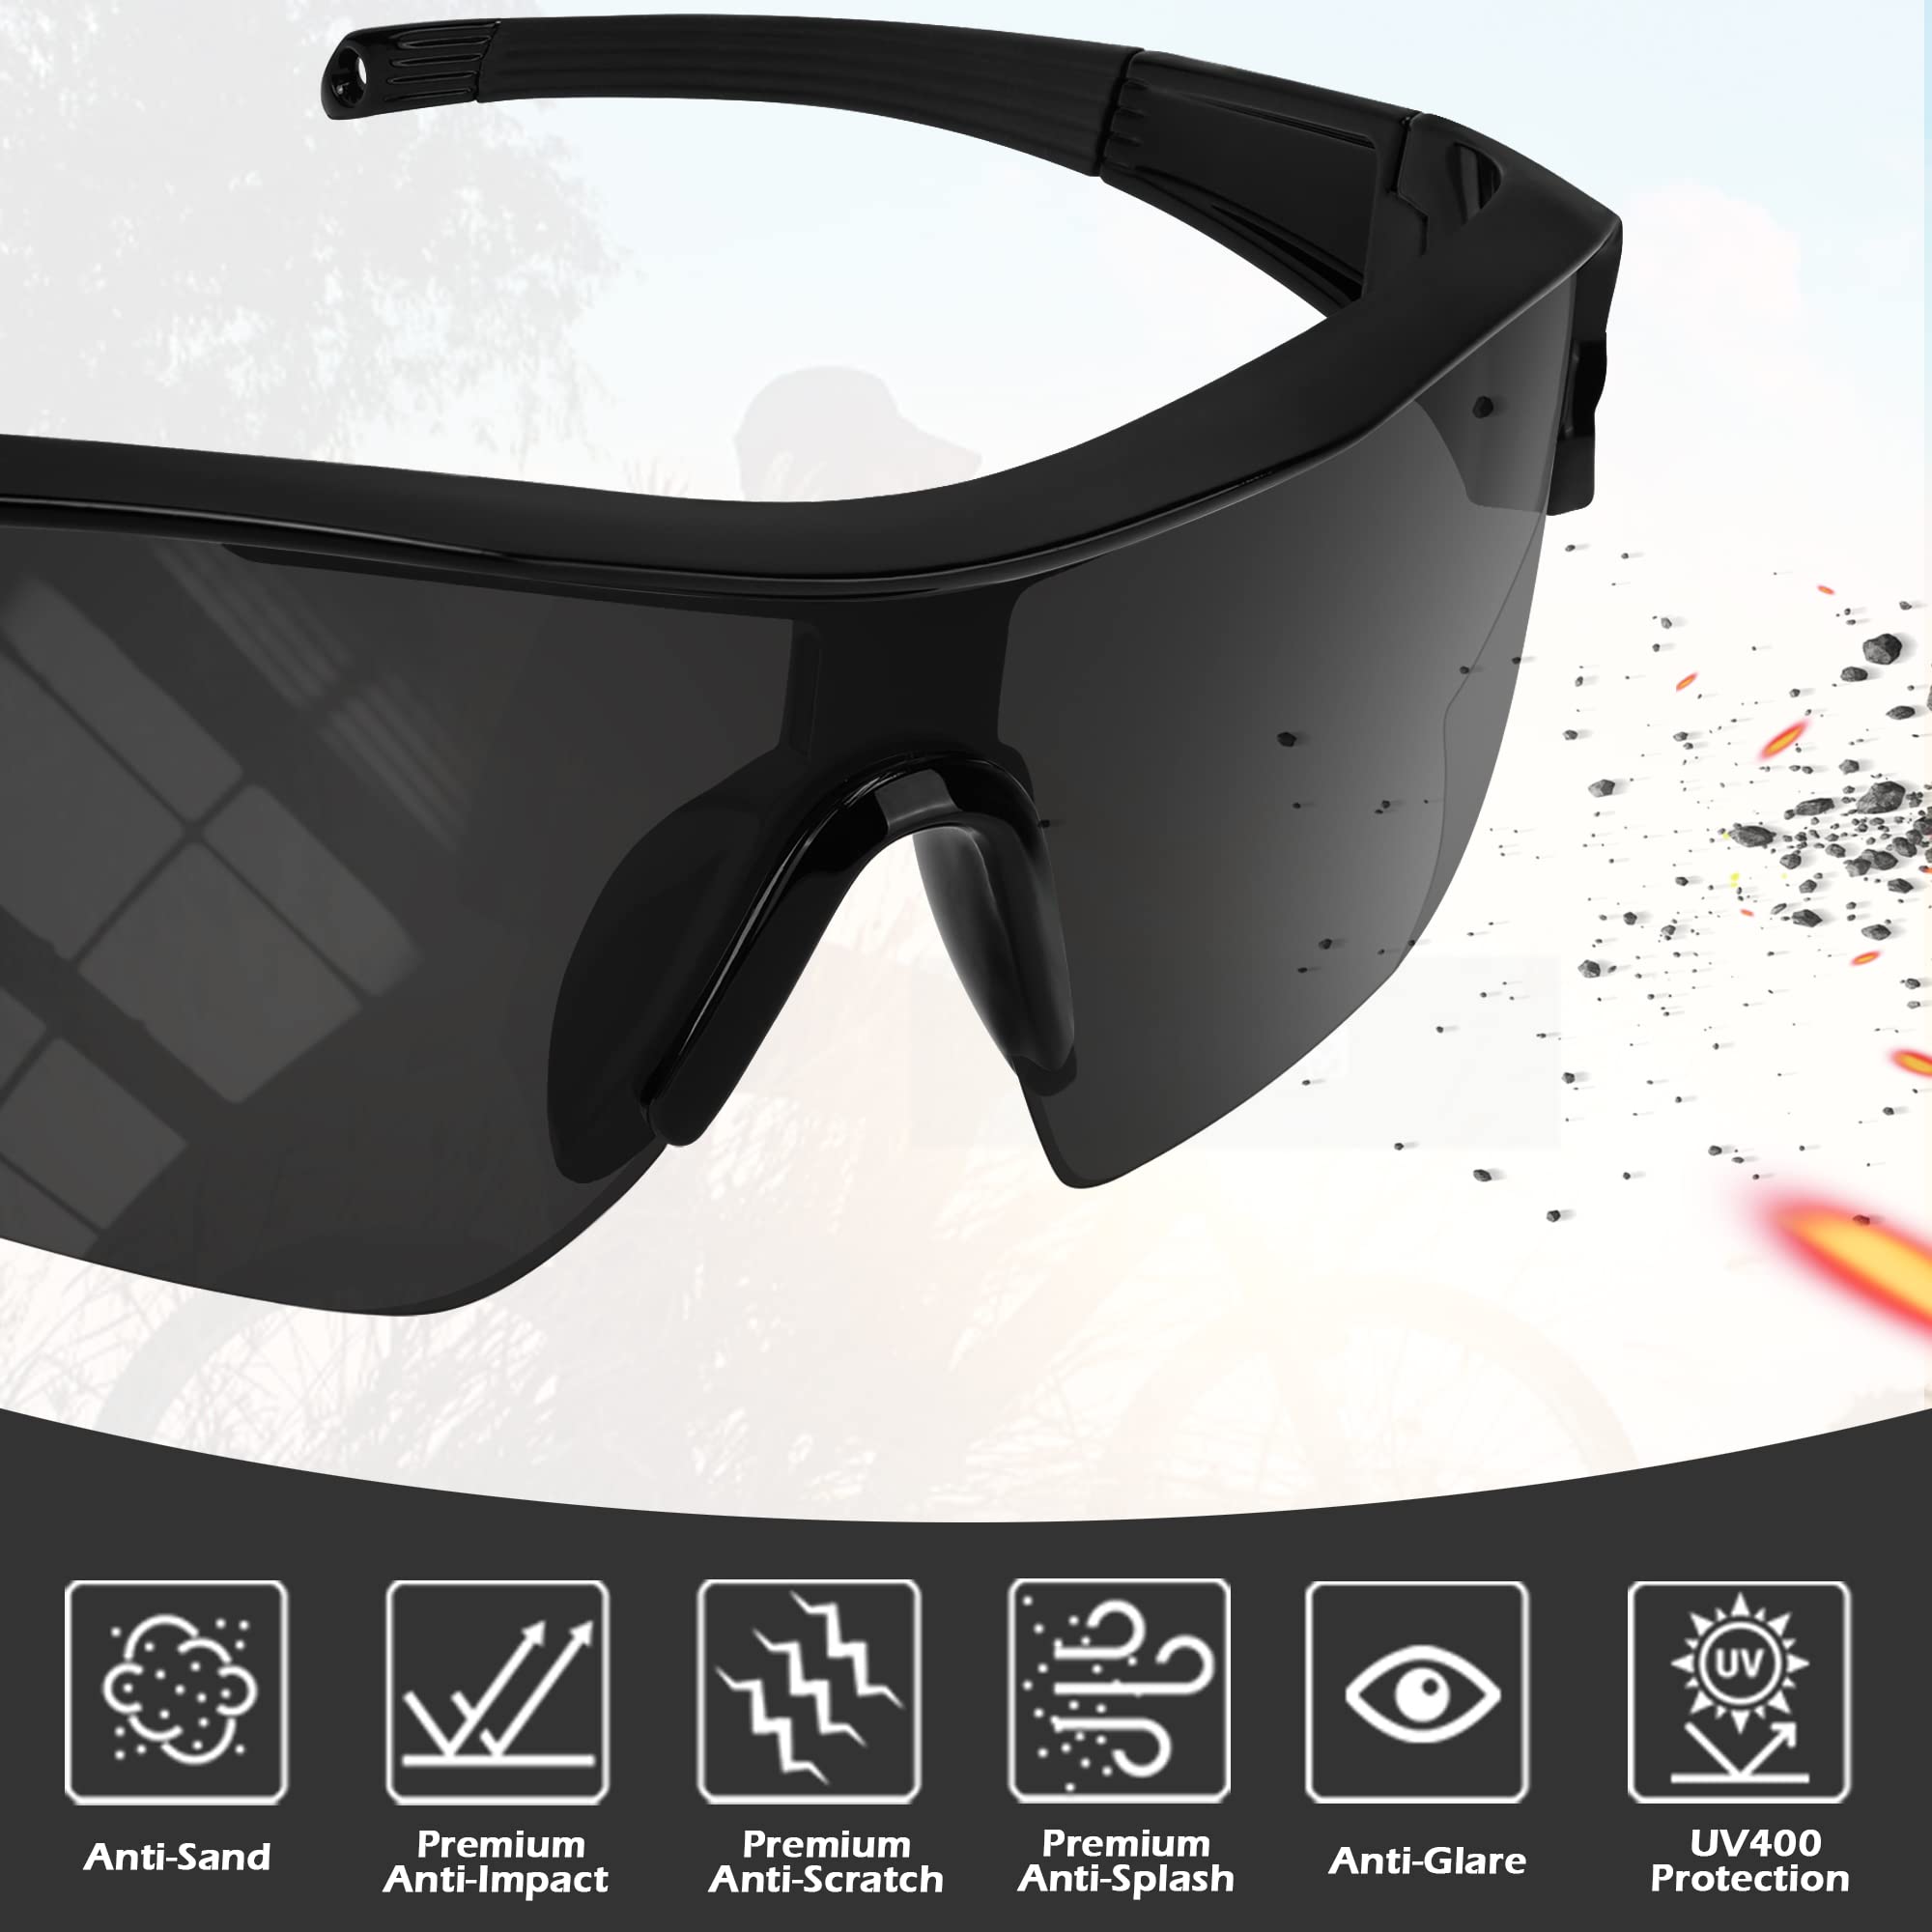 YENPK 12 Pack Tinted Safety Glasses Protective Eyewear, Safety Goggles Sunglasses for Men and Women, ANSI Z87.1+ Certified, Eyes Protection UV400 Anti Splash & Scratch, Impact Resistant(Dark Grey)